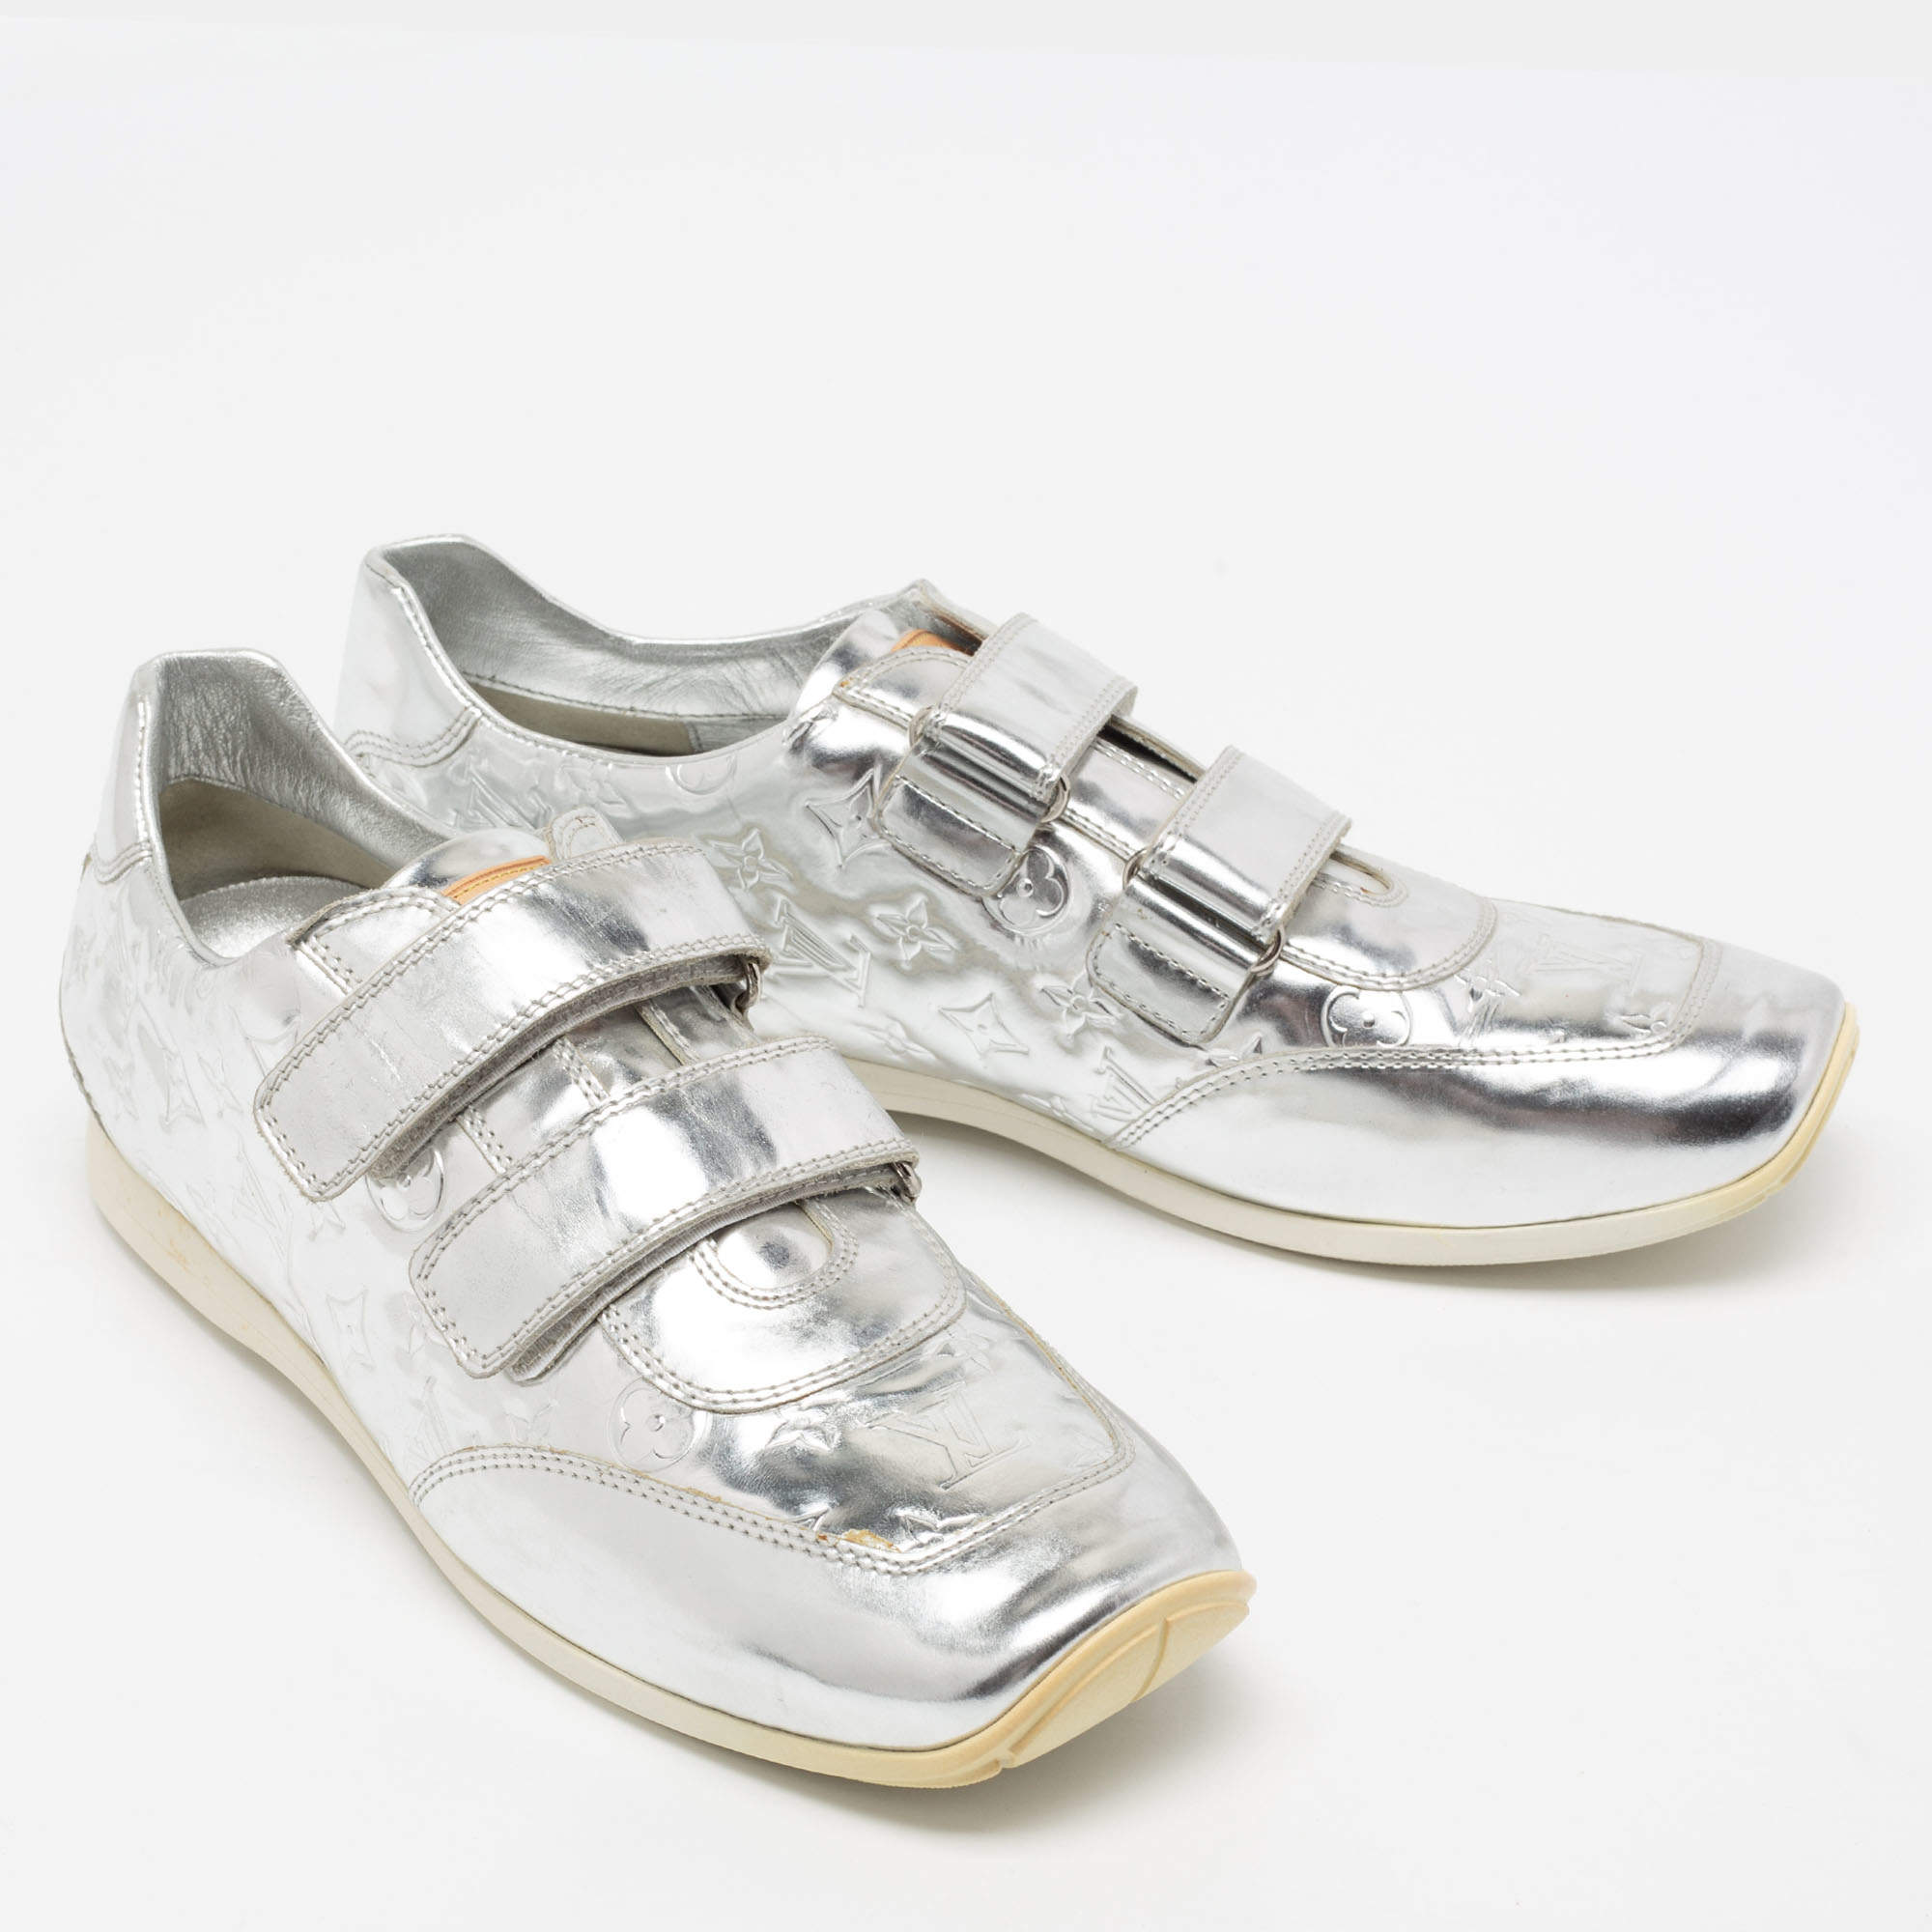 Louis Vuitton Metallic Silver Monogram Leather Trainers Lace Up Low Top  Sneakers Size 38 Louis Vuitton